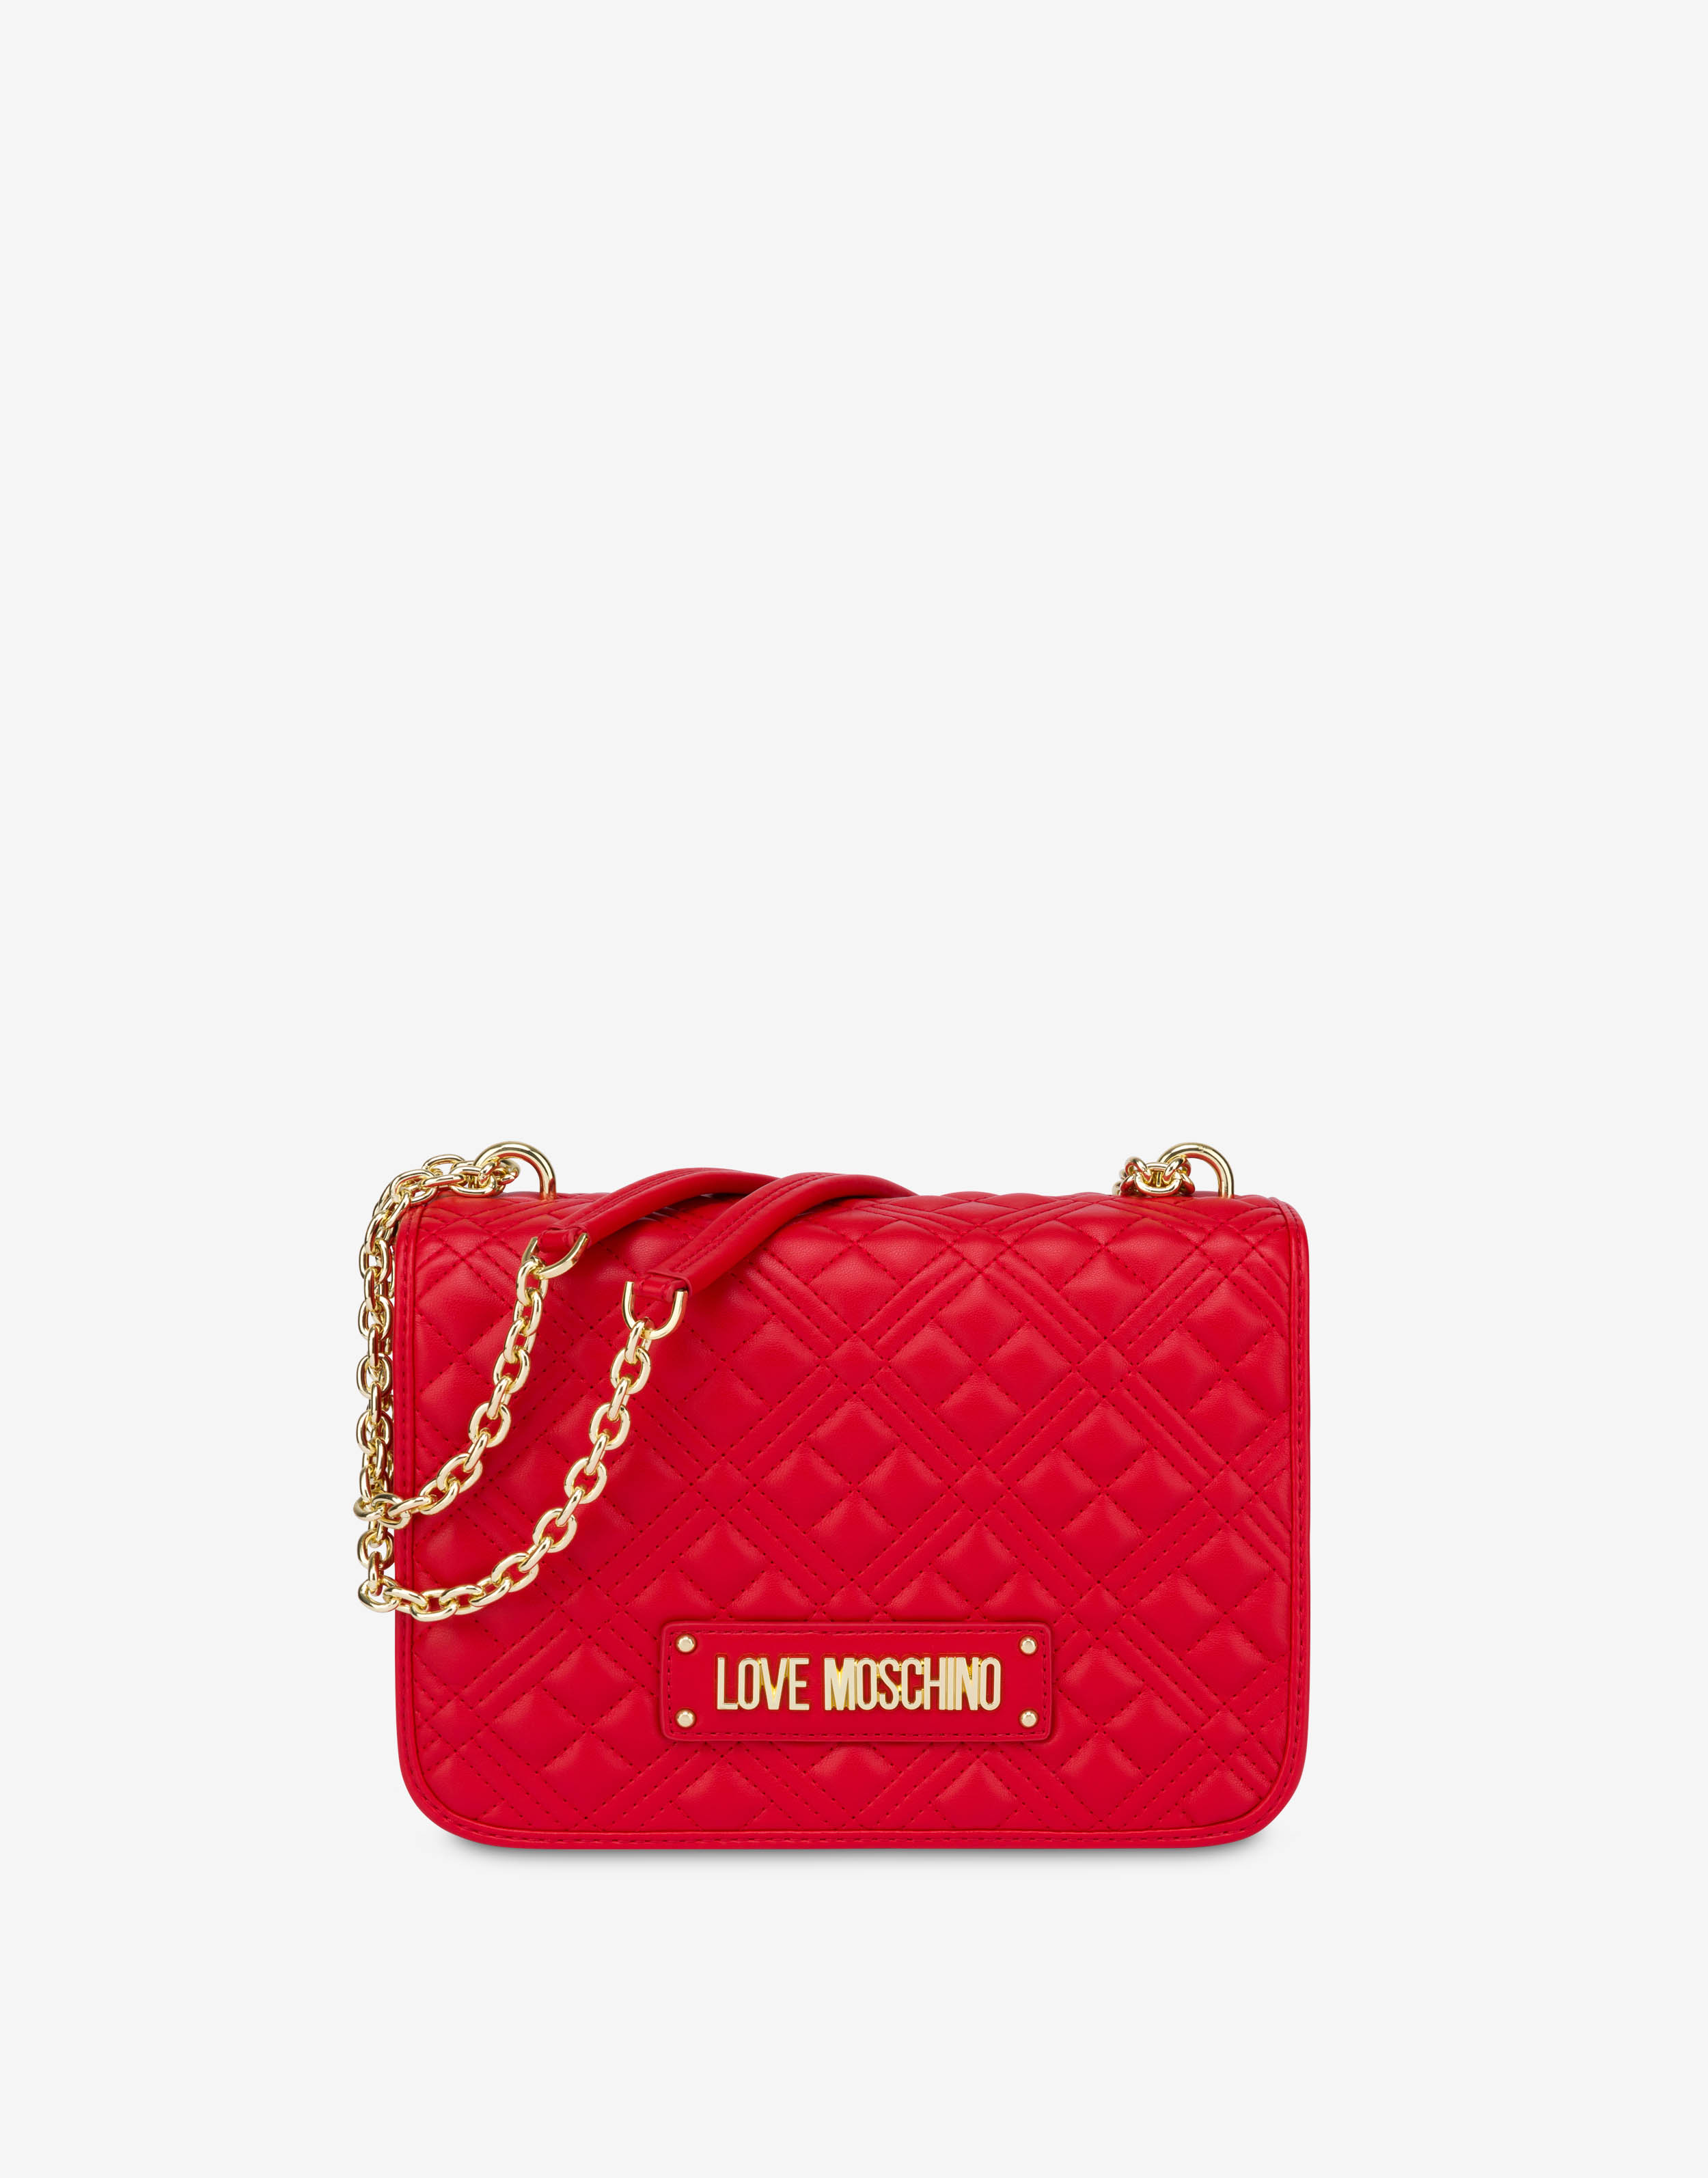 Love Moschino Shoulder Bag, Red (Rosso) : Clothing, Shoes & Jewelry -  Amazon.com